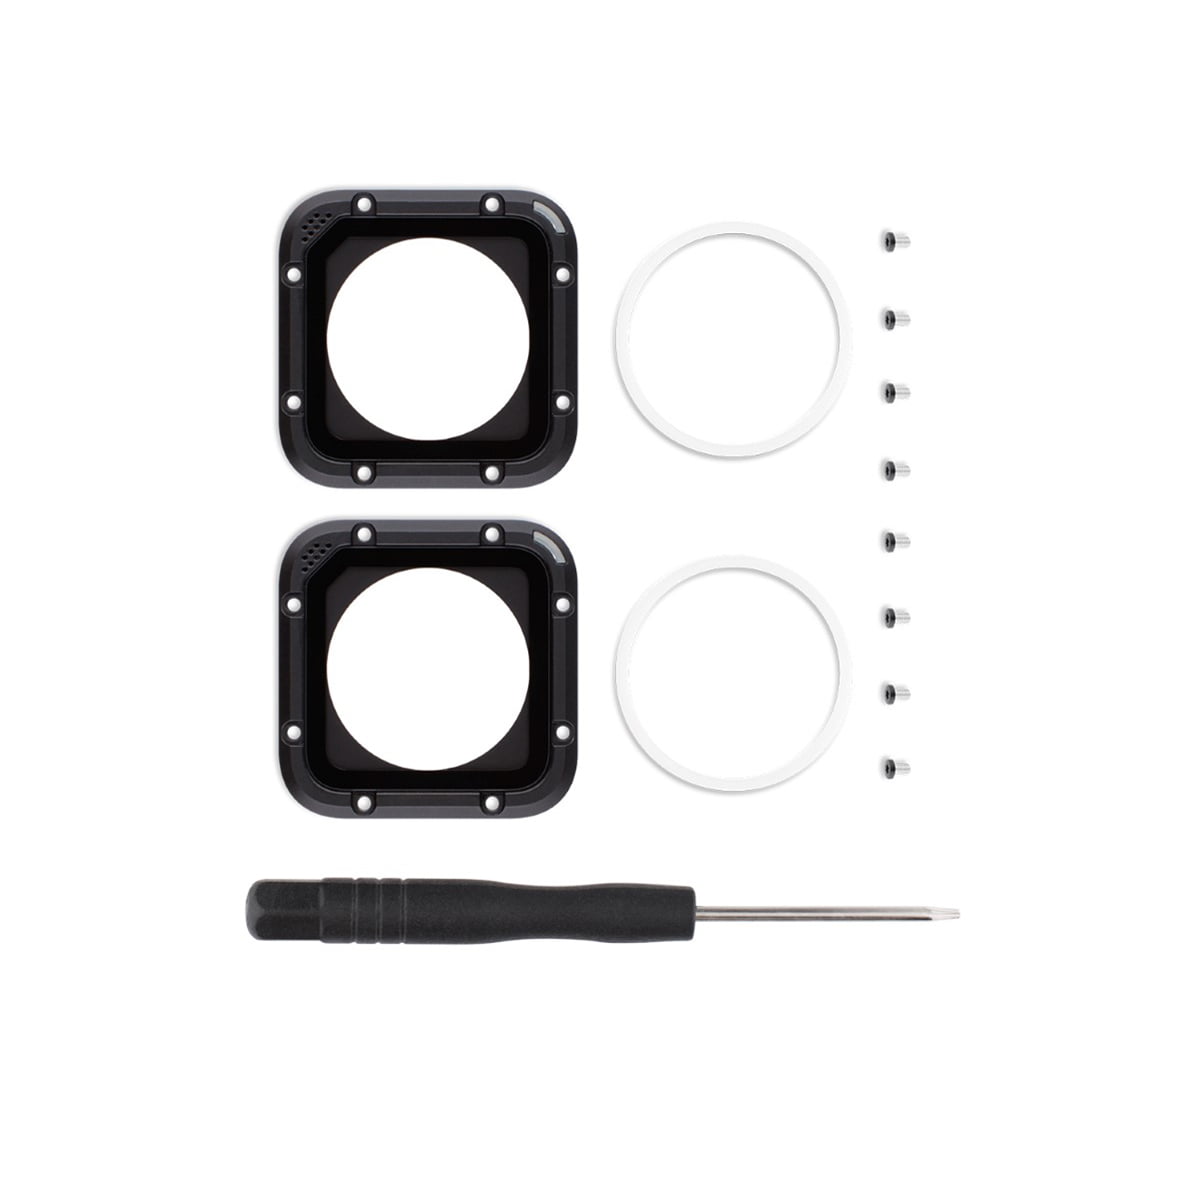 GoPro Lens Replacement Kit For Hero 4 Session (2 Pack)